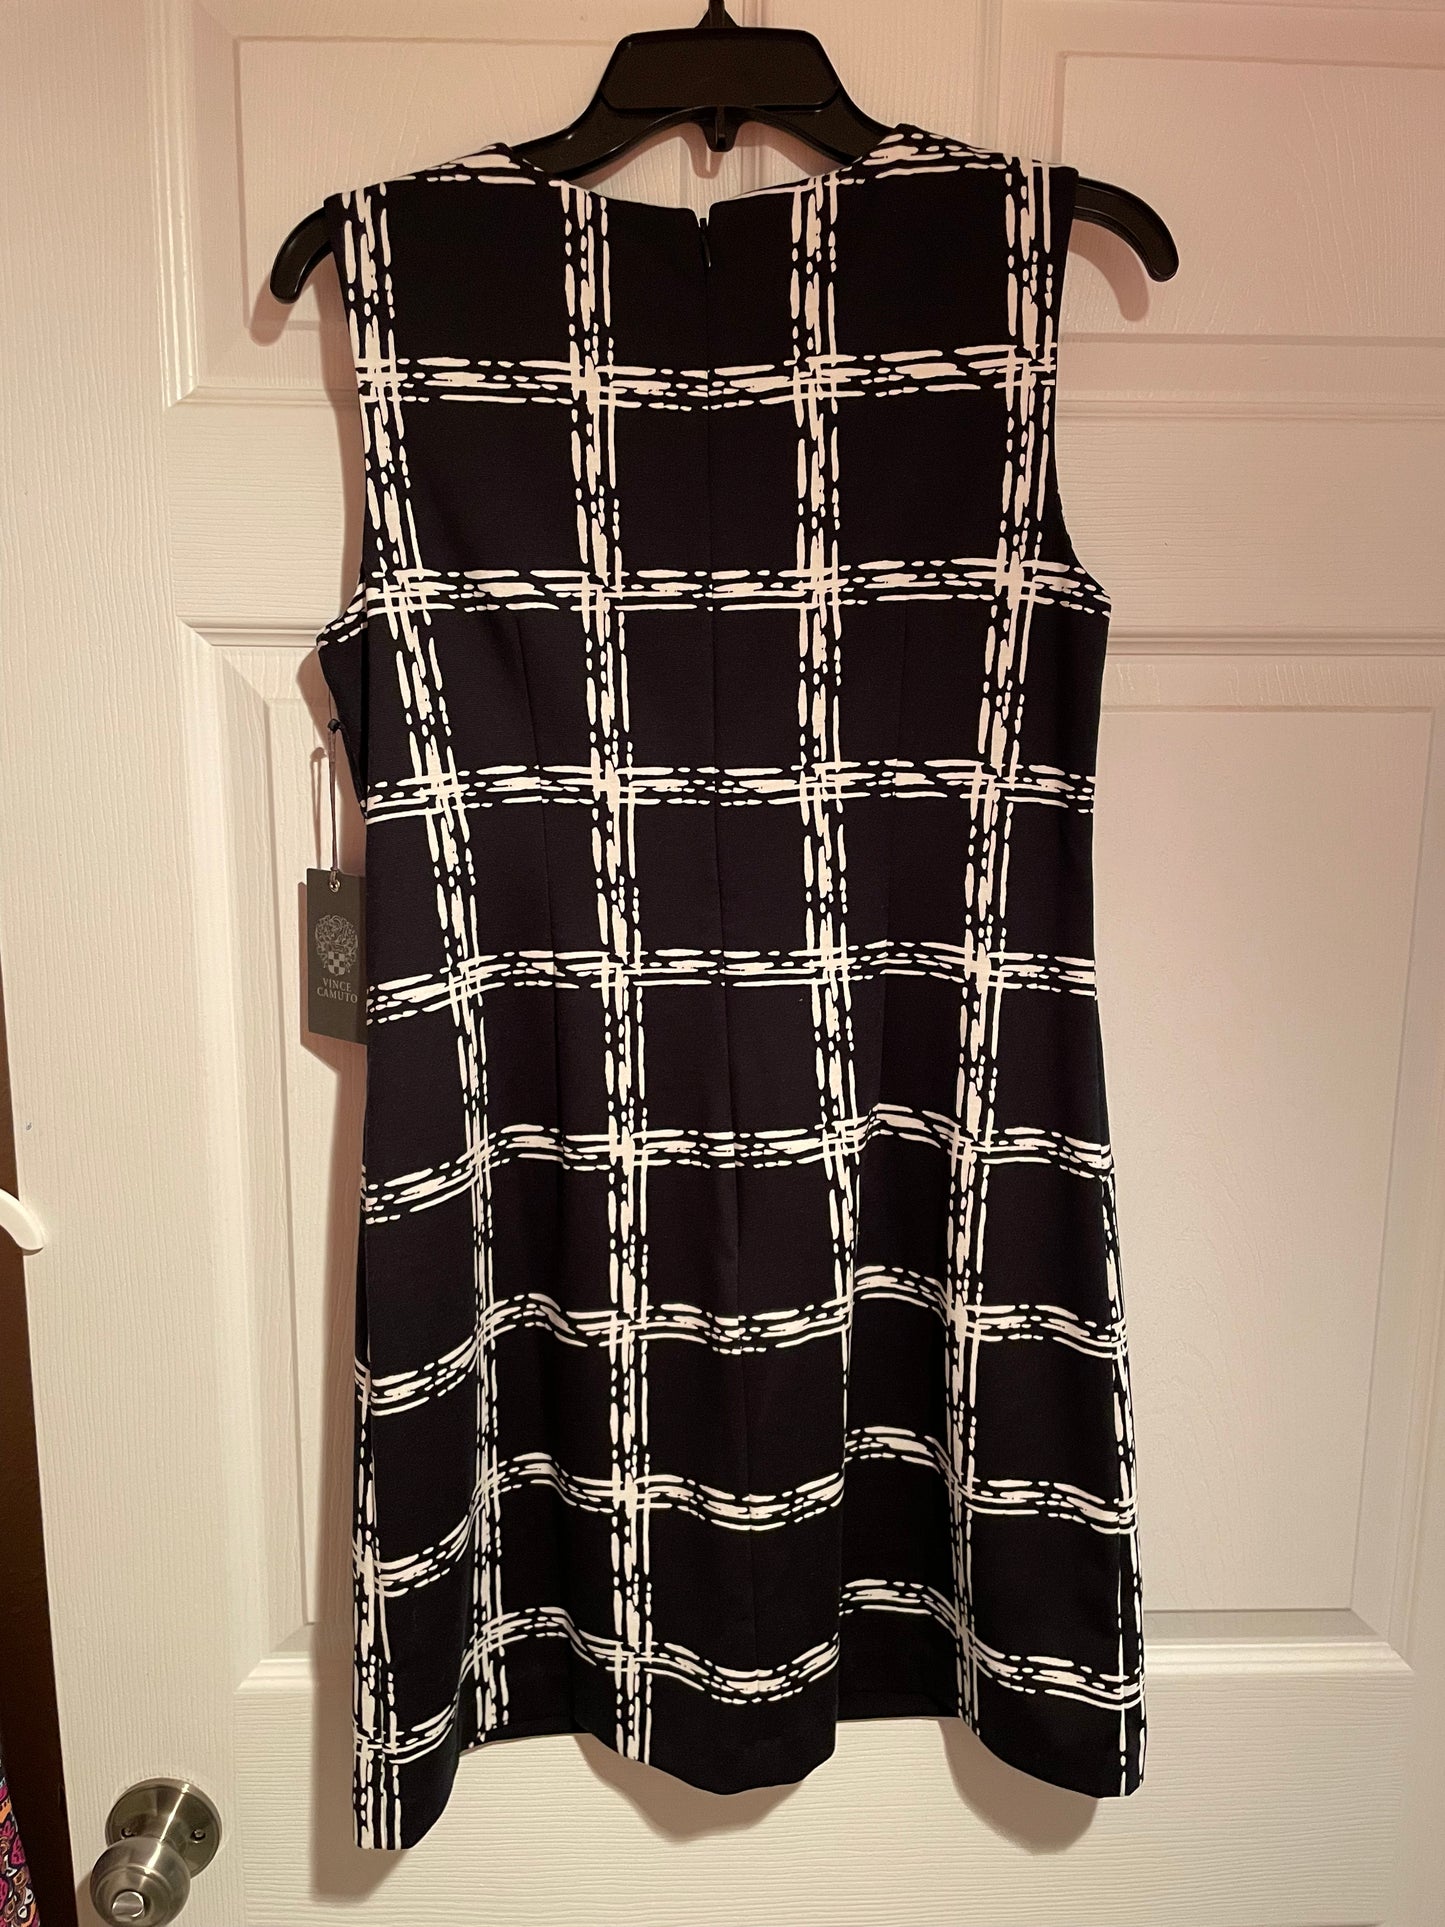 Vince Camuto Size 6 Black & White Dress NEW with Tags